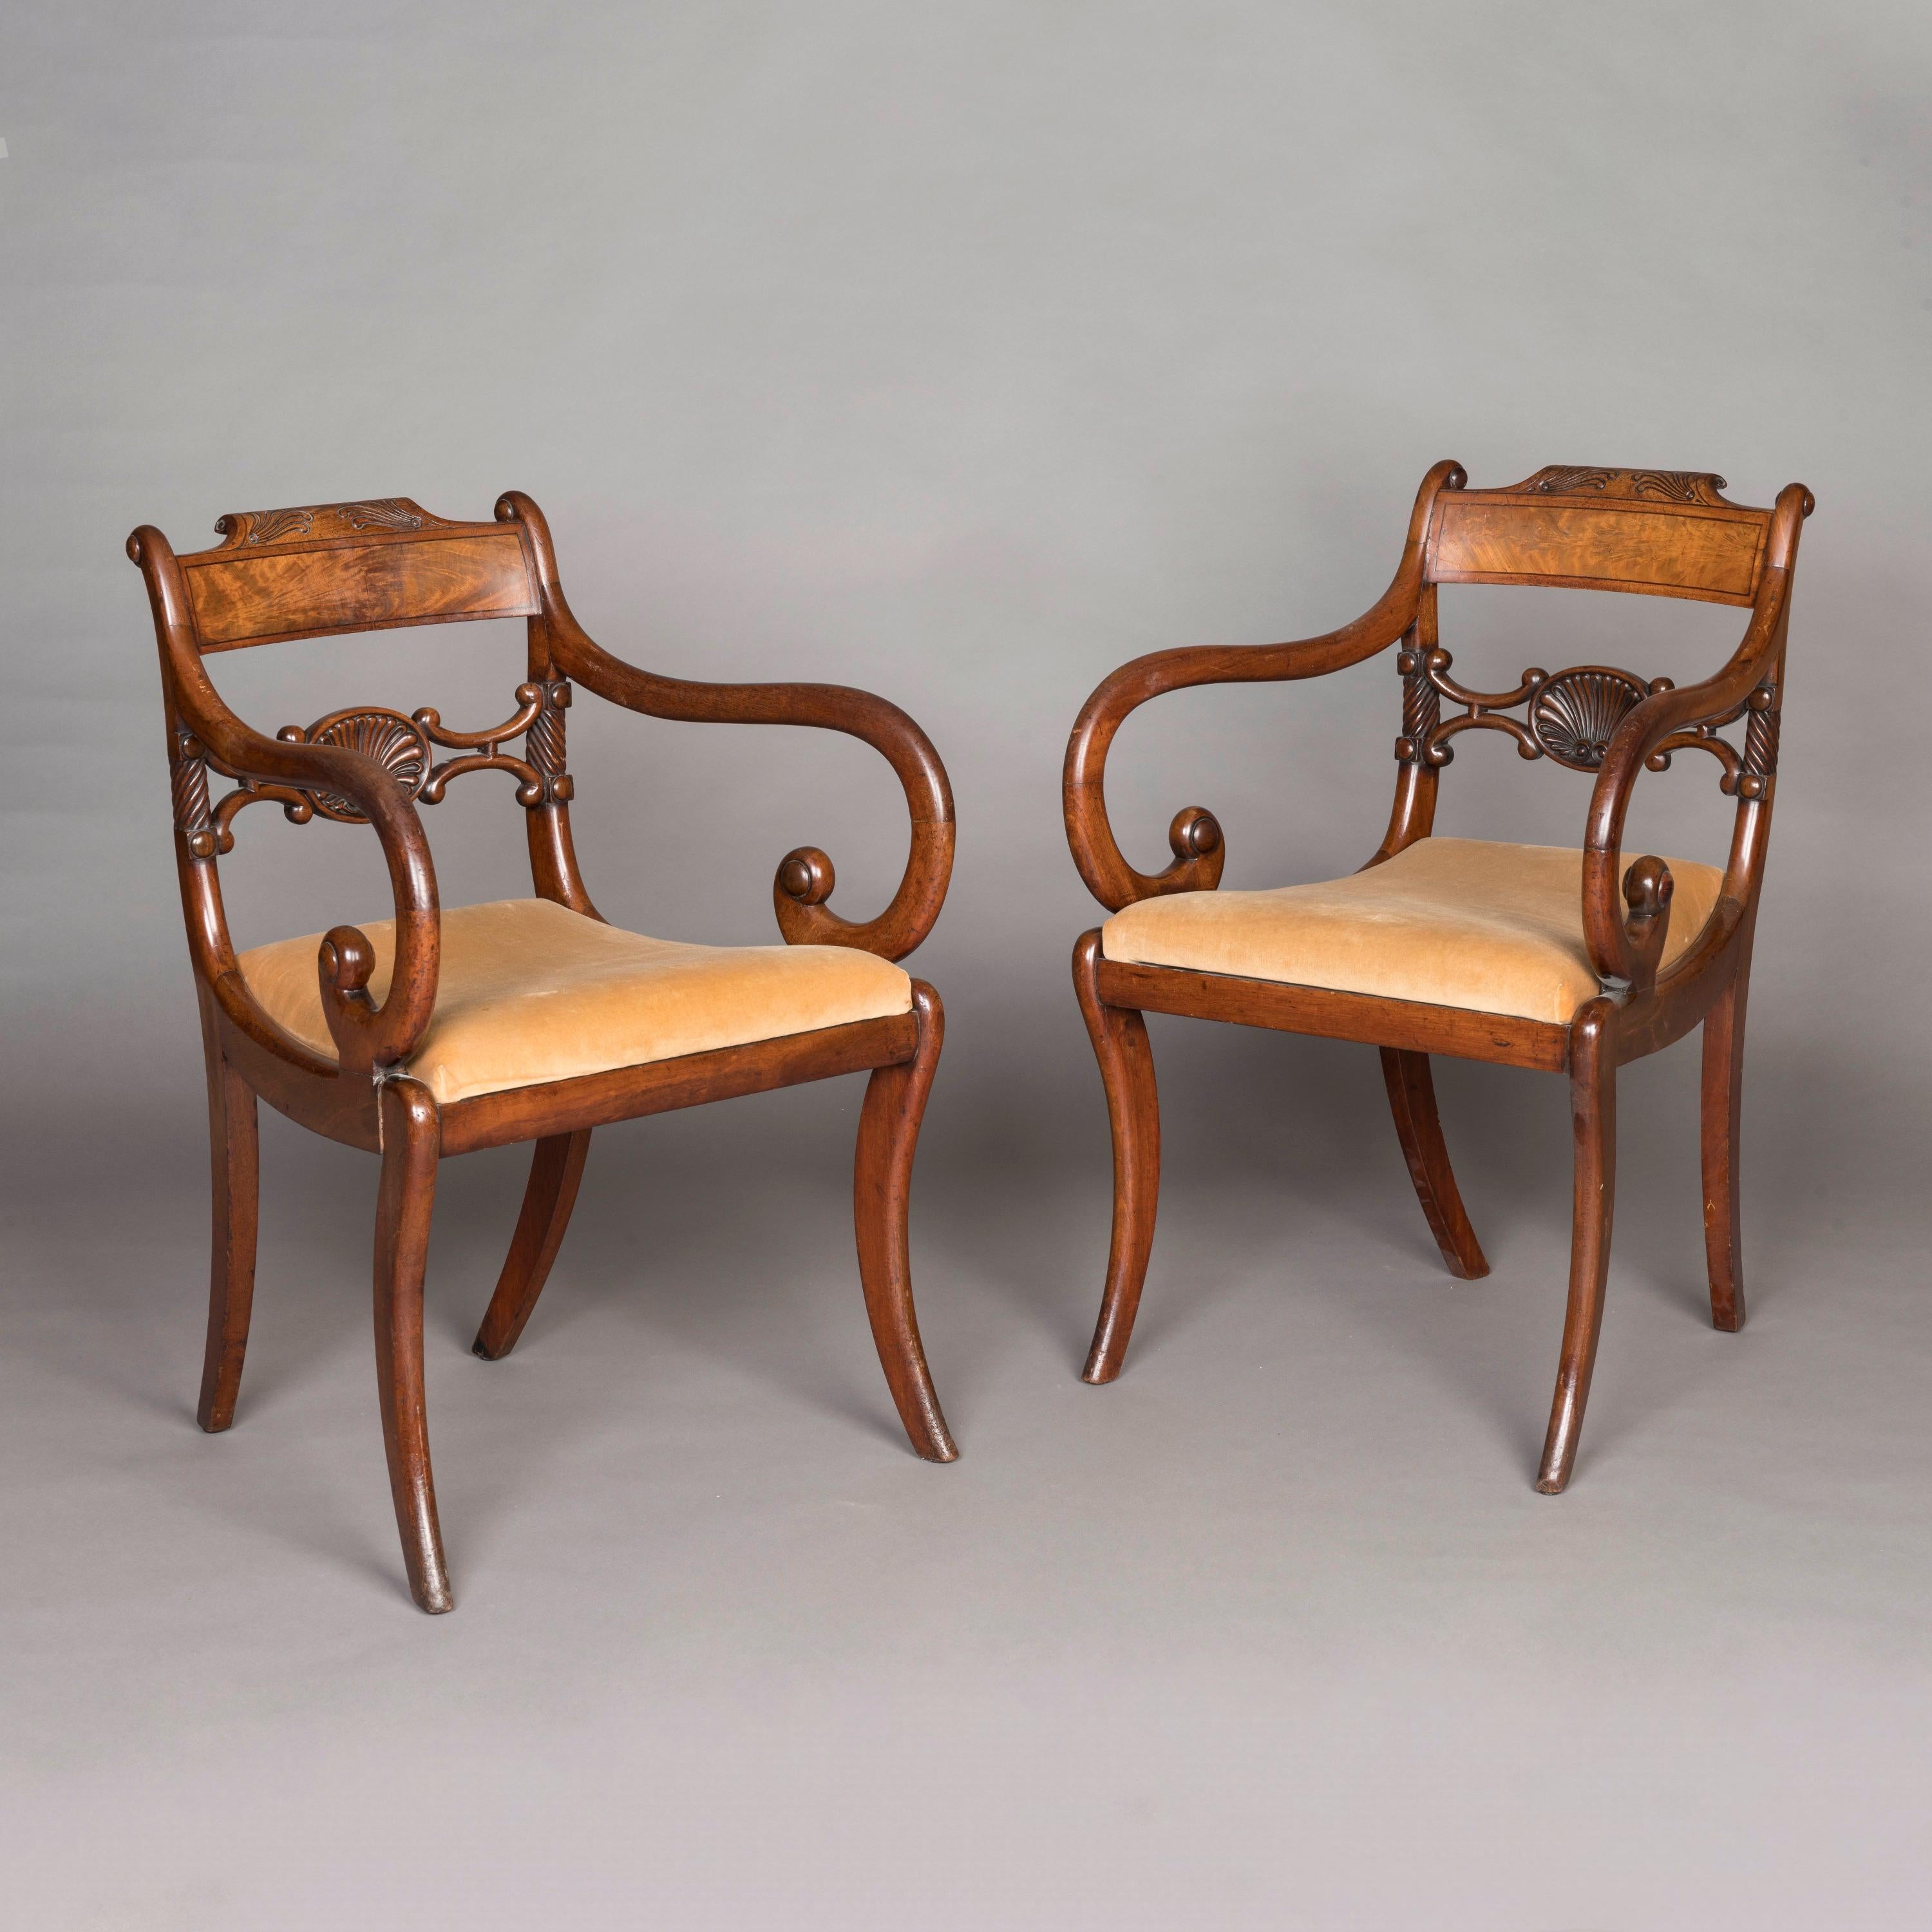 A Pair of Elegant Regency Armchairs

Constructed in mahogany, rising from sabre form front legs, bold 'C' scroll arm with roundels, the centre splat having a central shell flanked by 'C' inverted brackets with rope twist terminals to the stiles, the